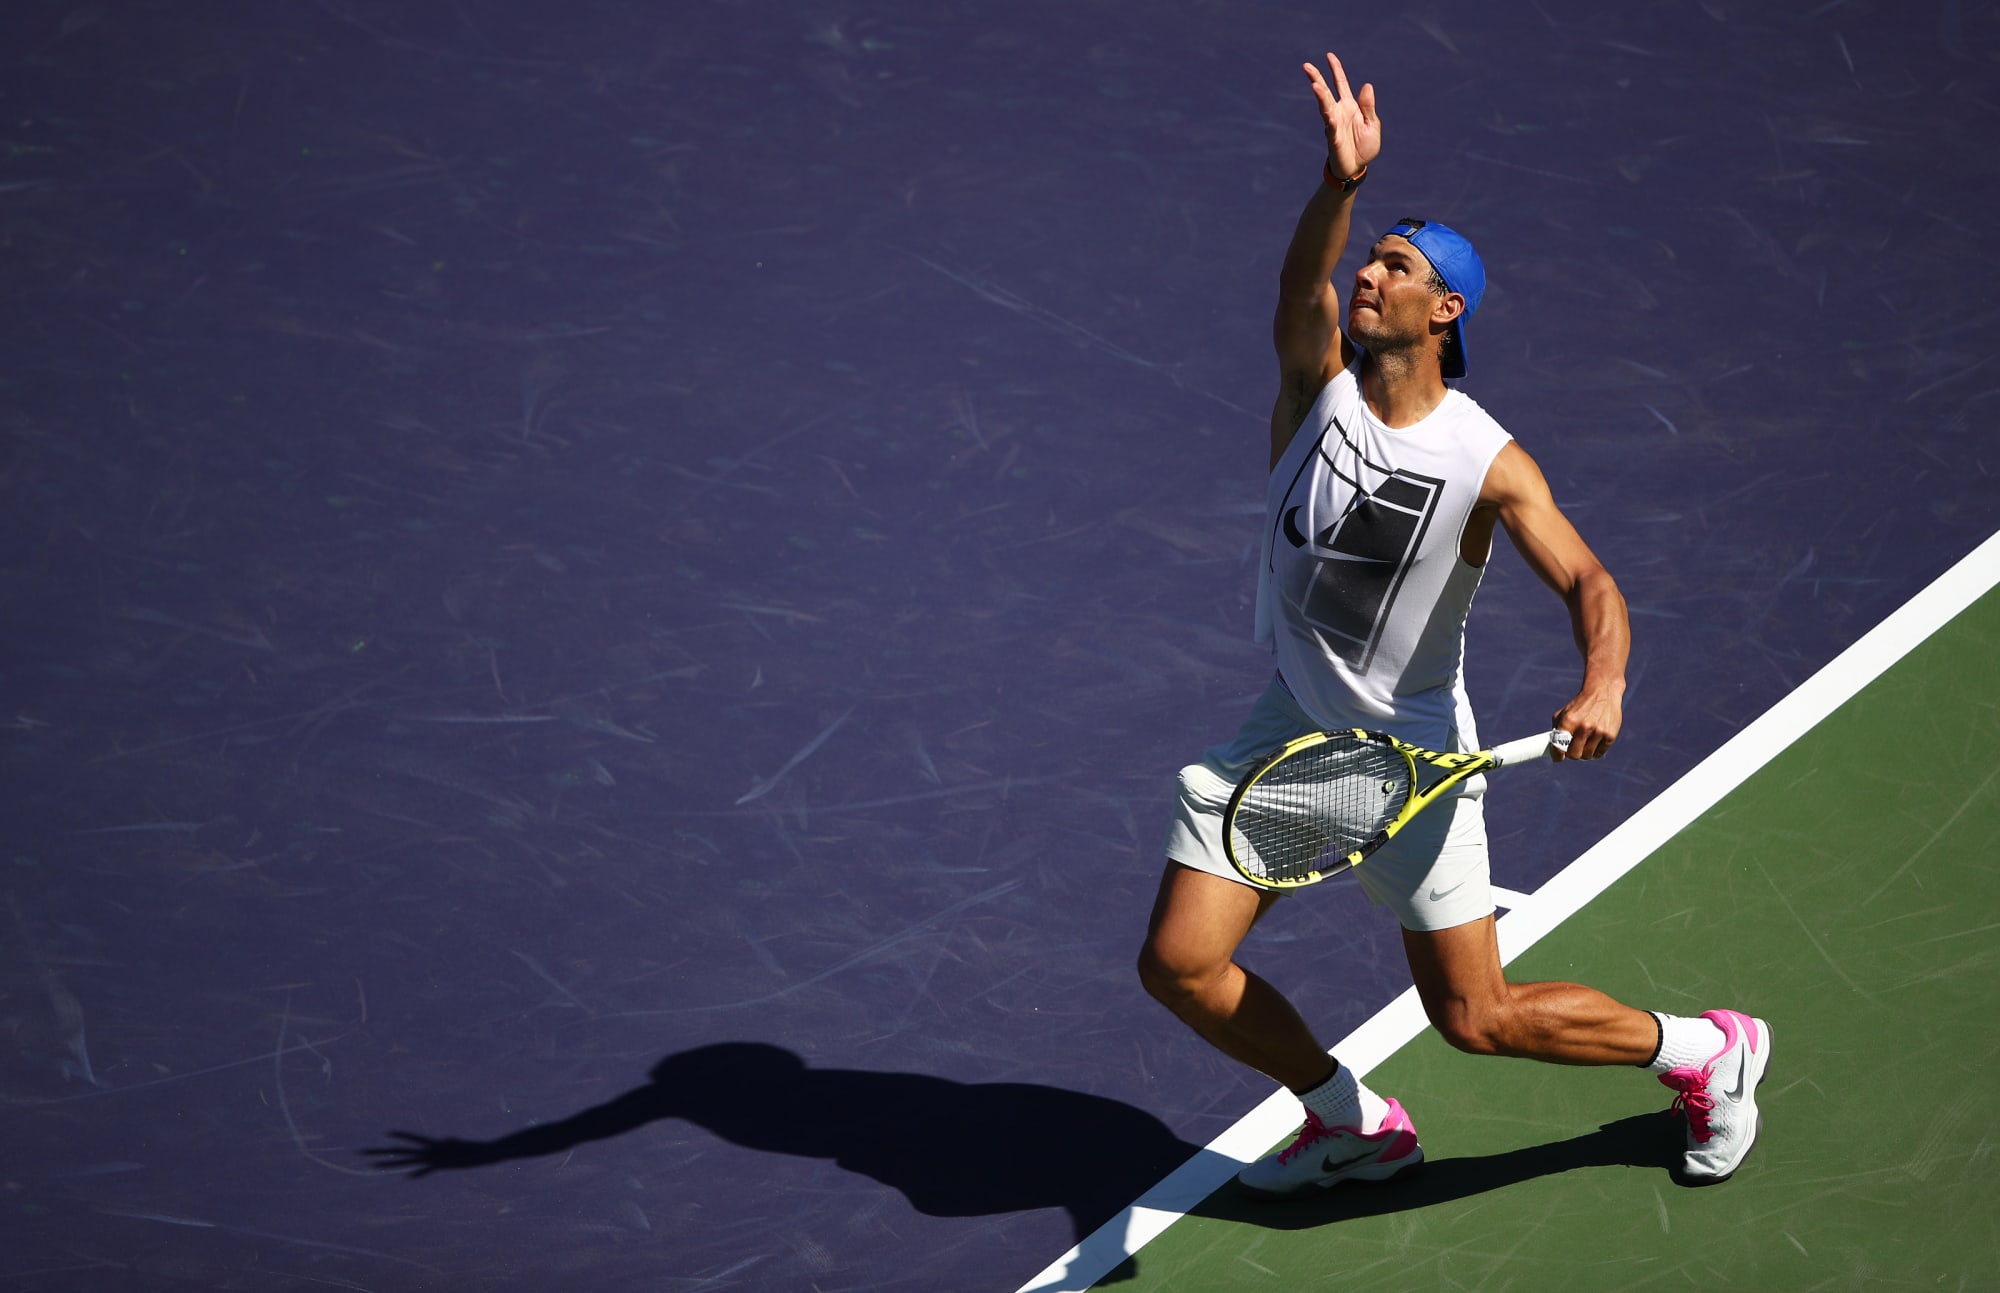 Rafael Nadal has momentum heading into the Indian Wells Masters